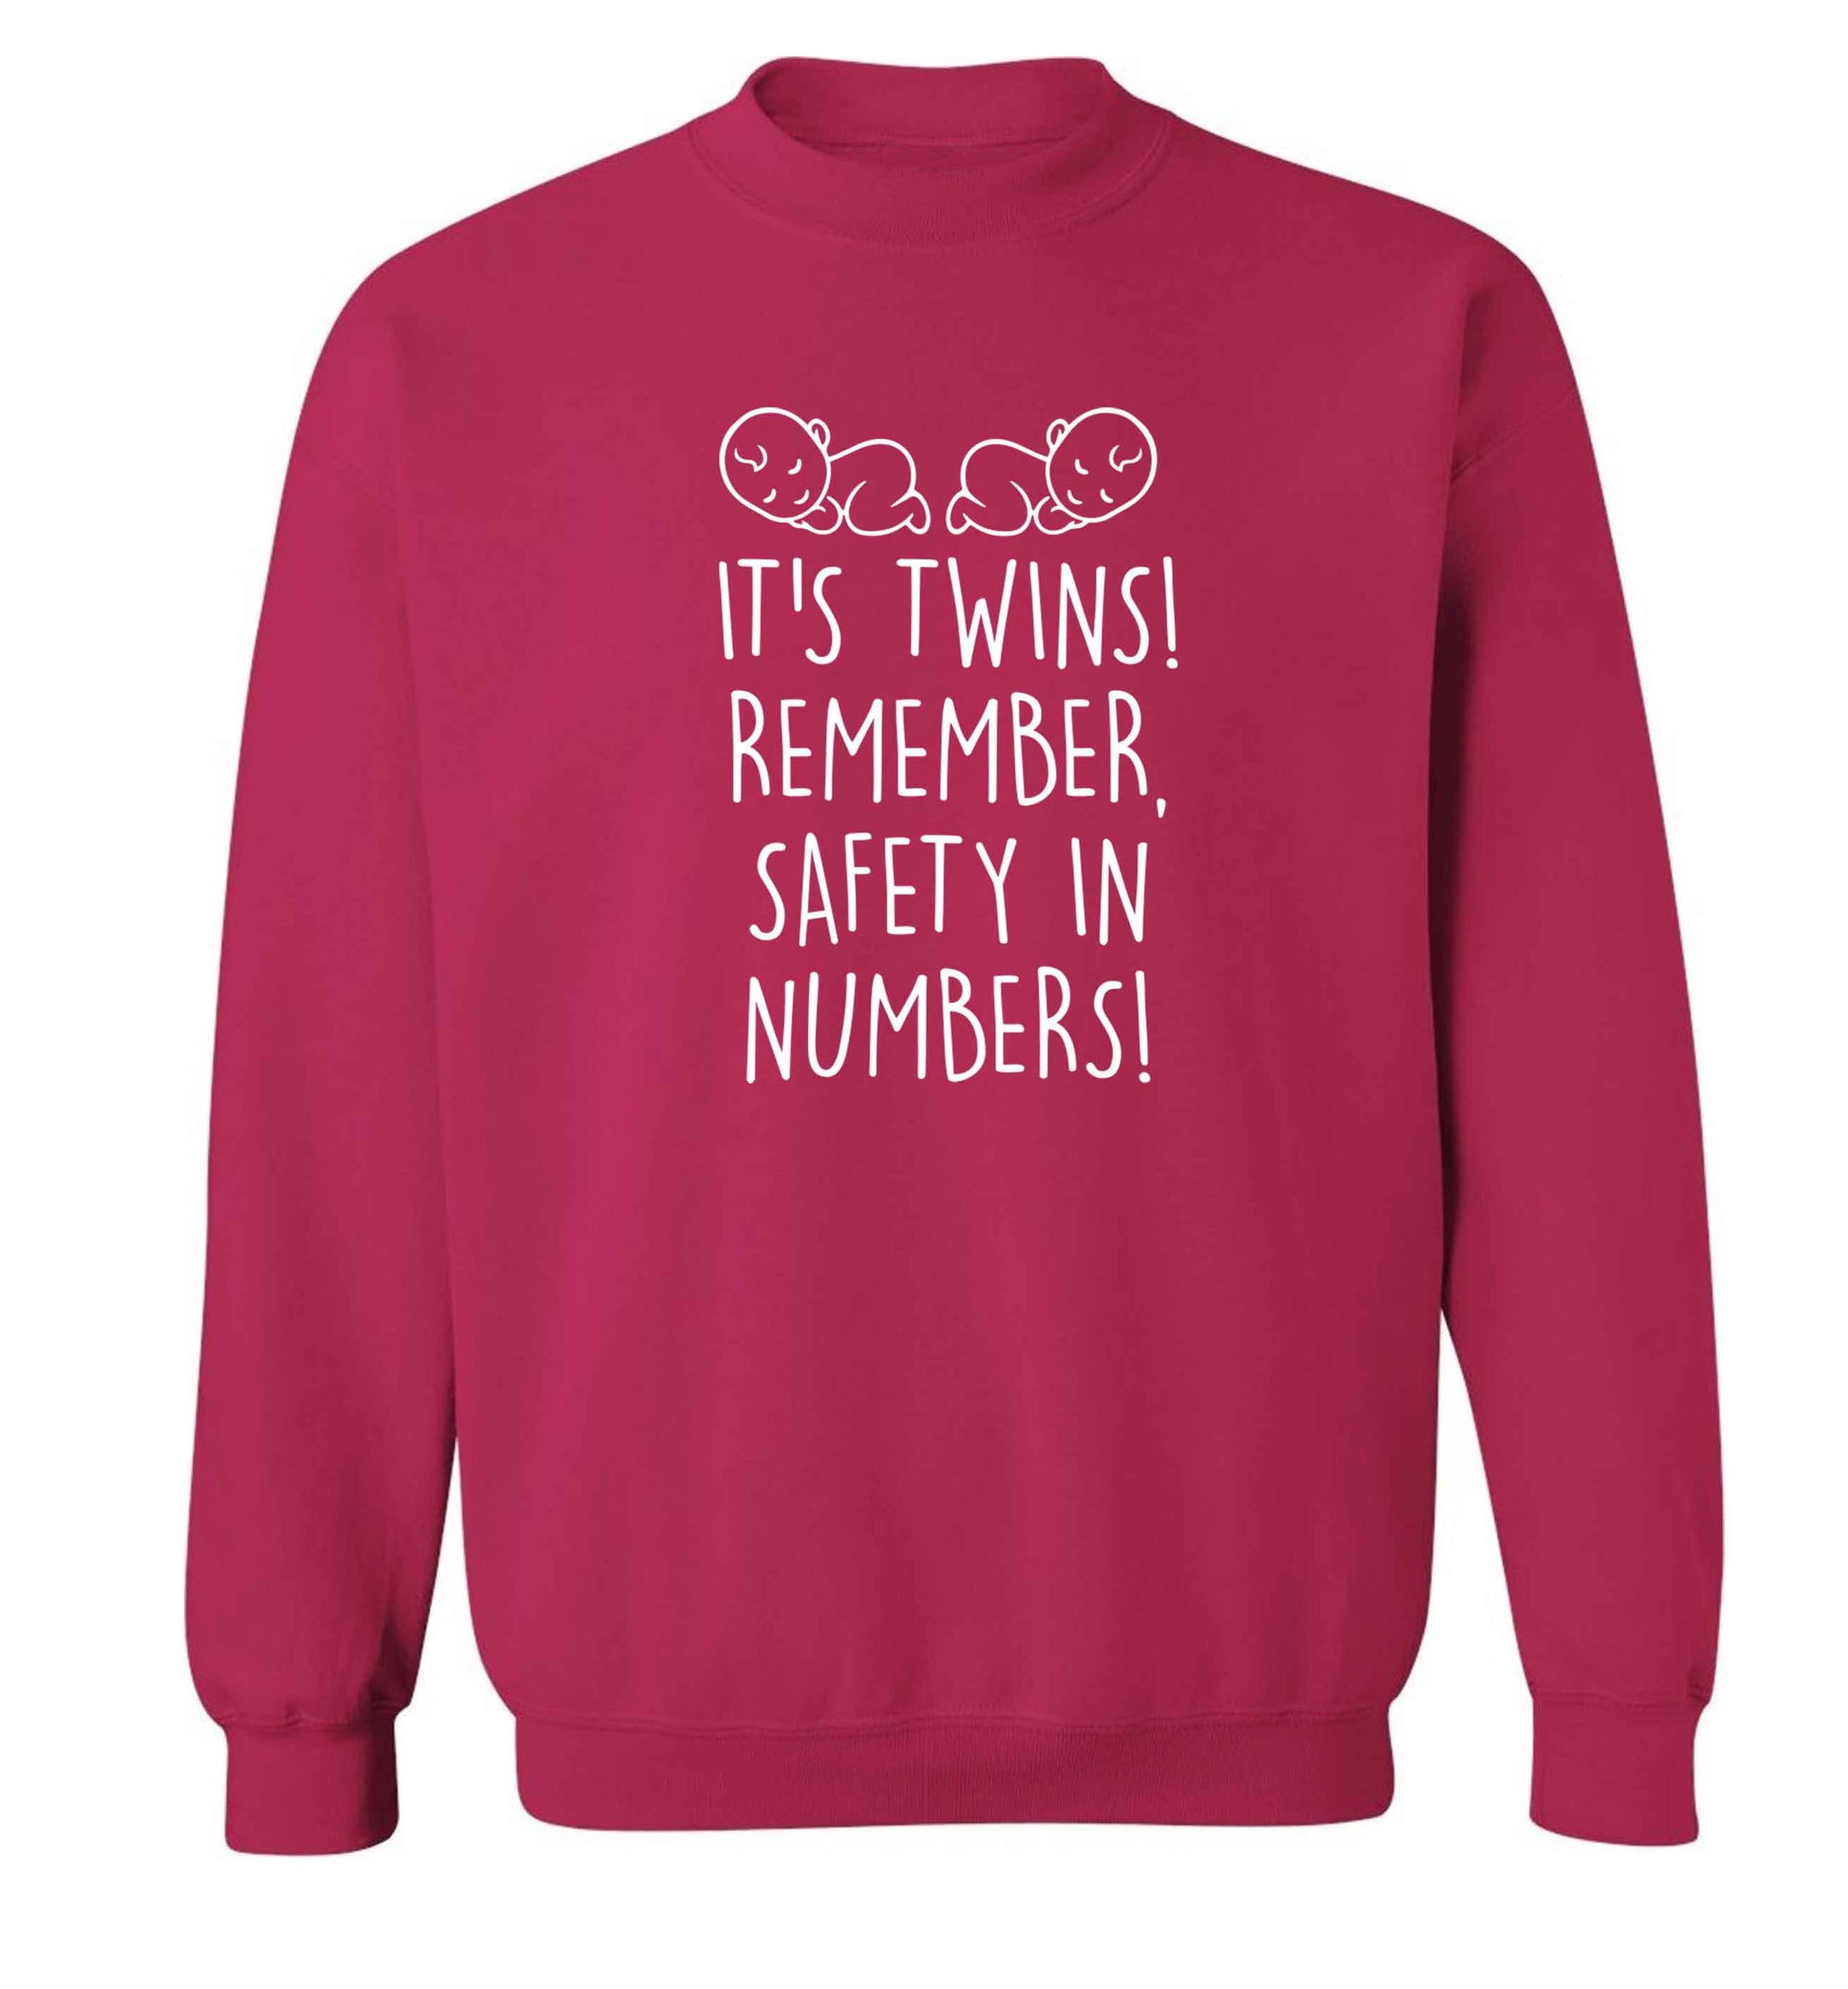 It's twins! Remember safety in numbers! adult's unisex pink sweater 2XL